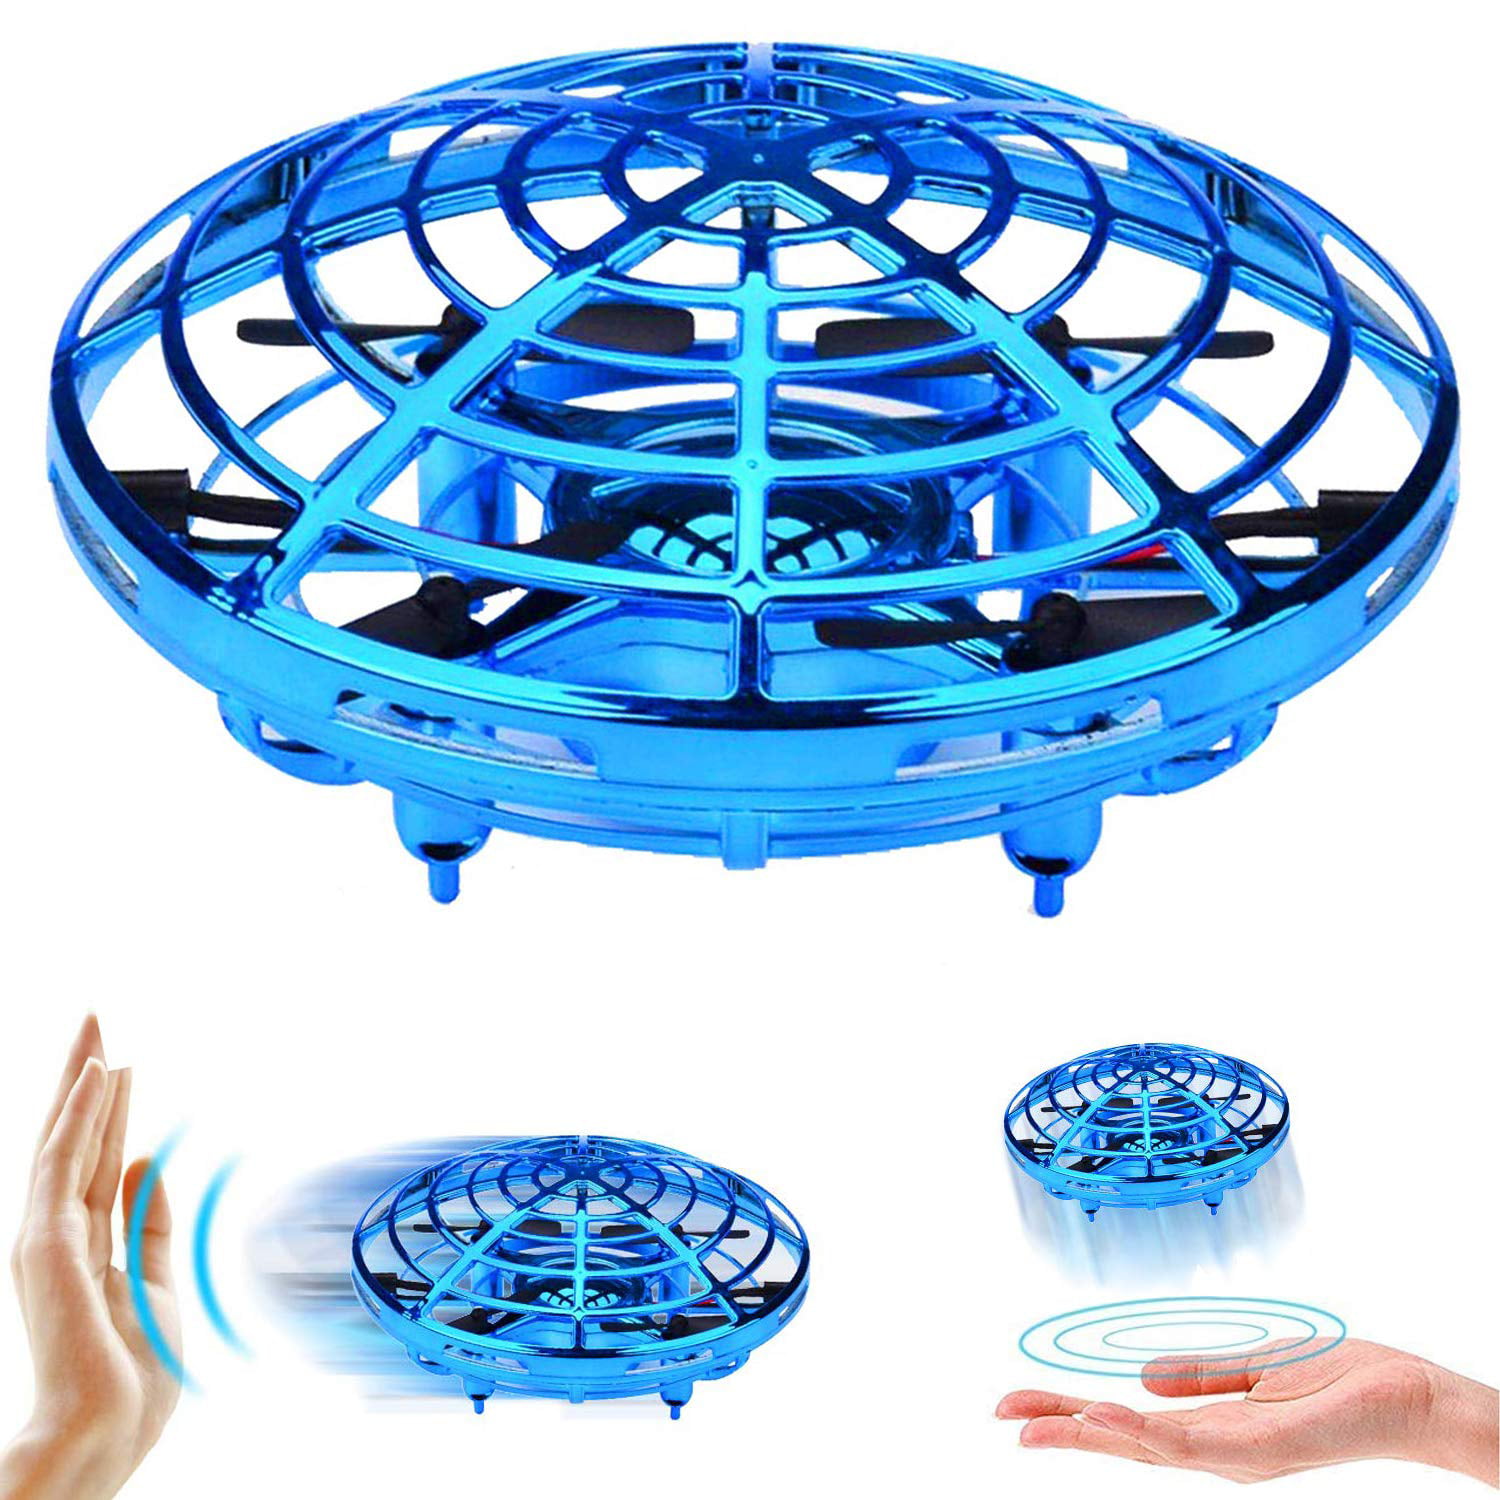 Magic Mini Drone Smart UFO Aircraft for Kids Flying Toys RC Hand Control Gift n4